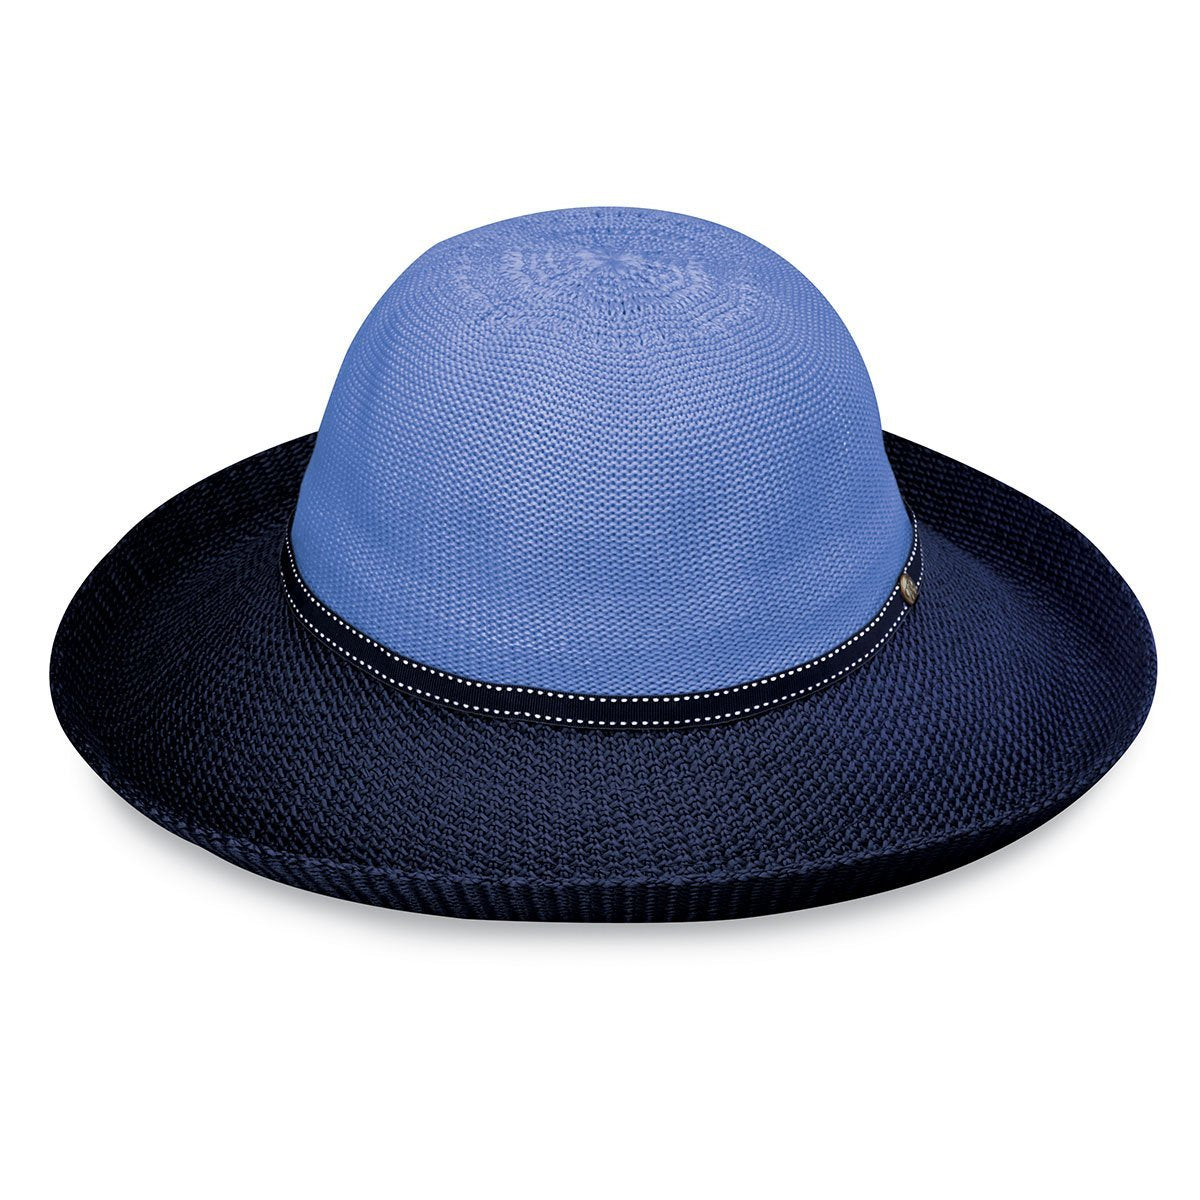 Featuring  Women's Packable Victoria Two-Toned UPF Sun Hat in Hydragena Navy from Wallaroo